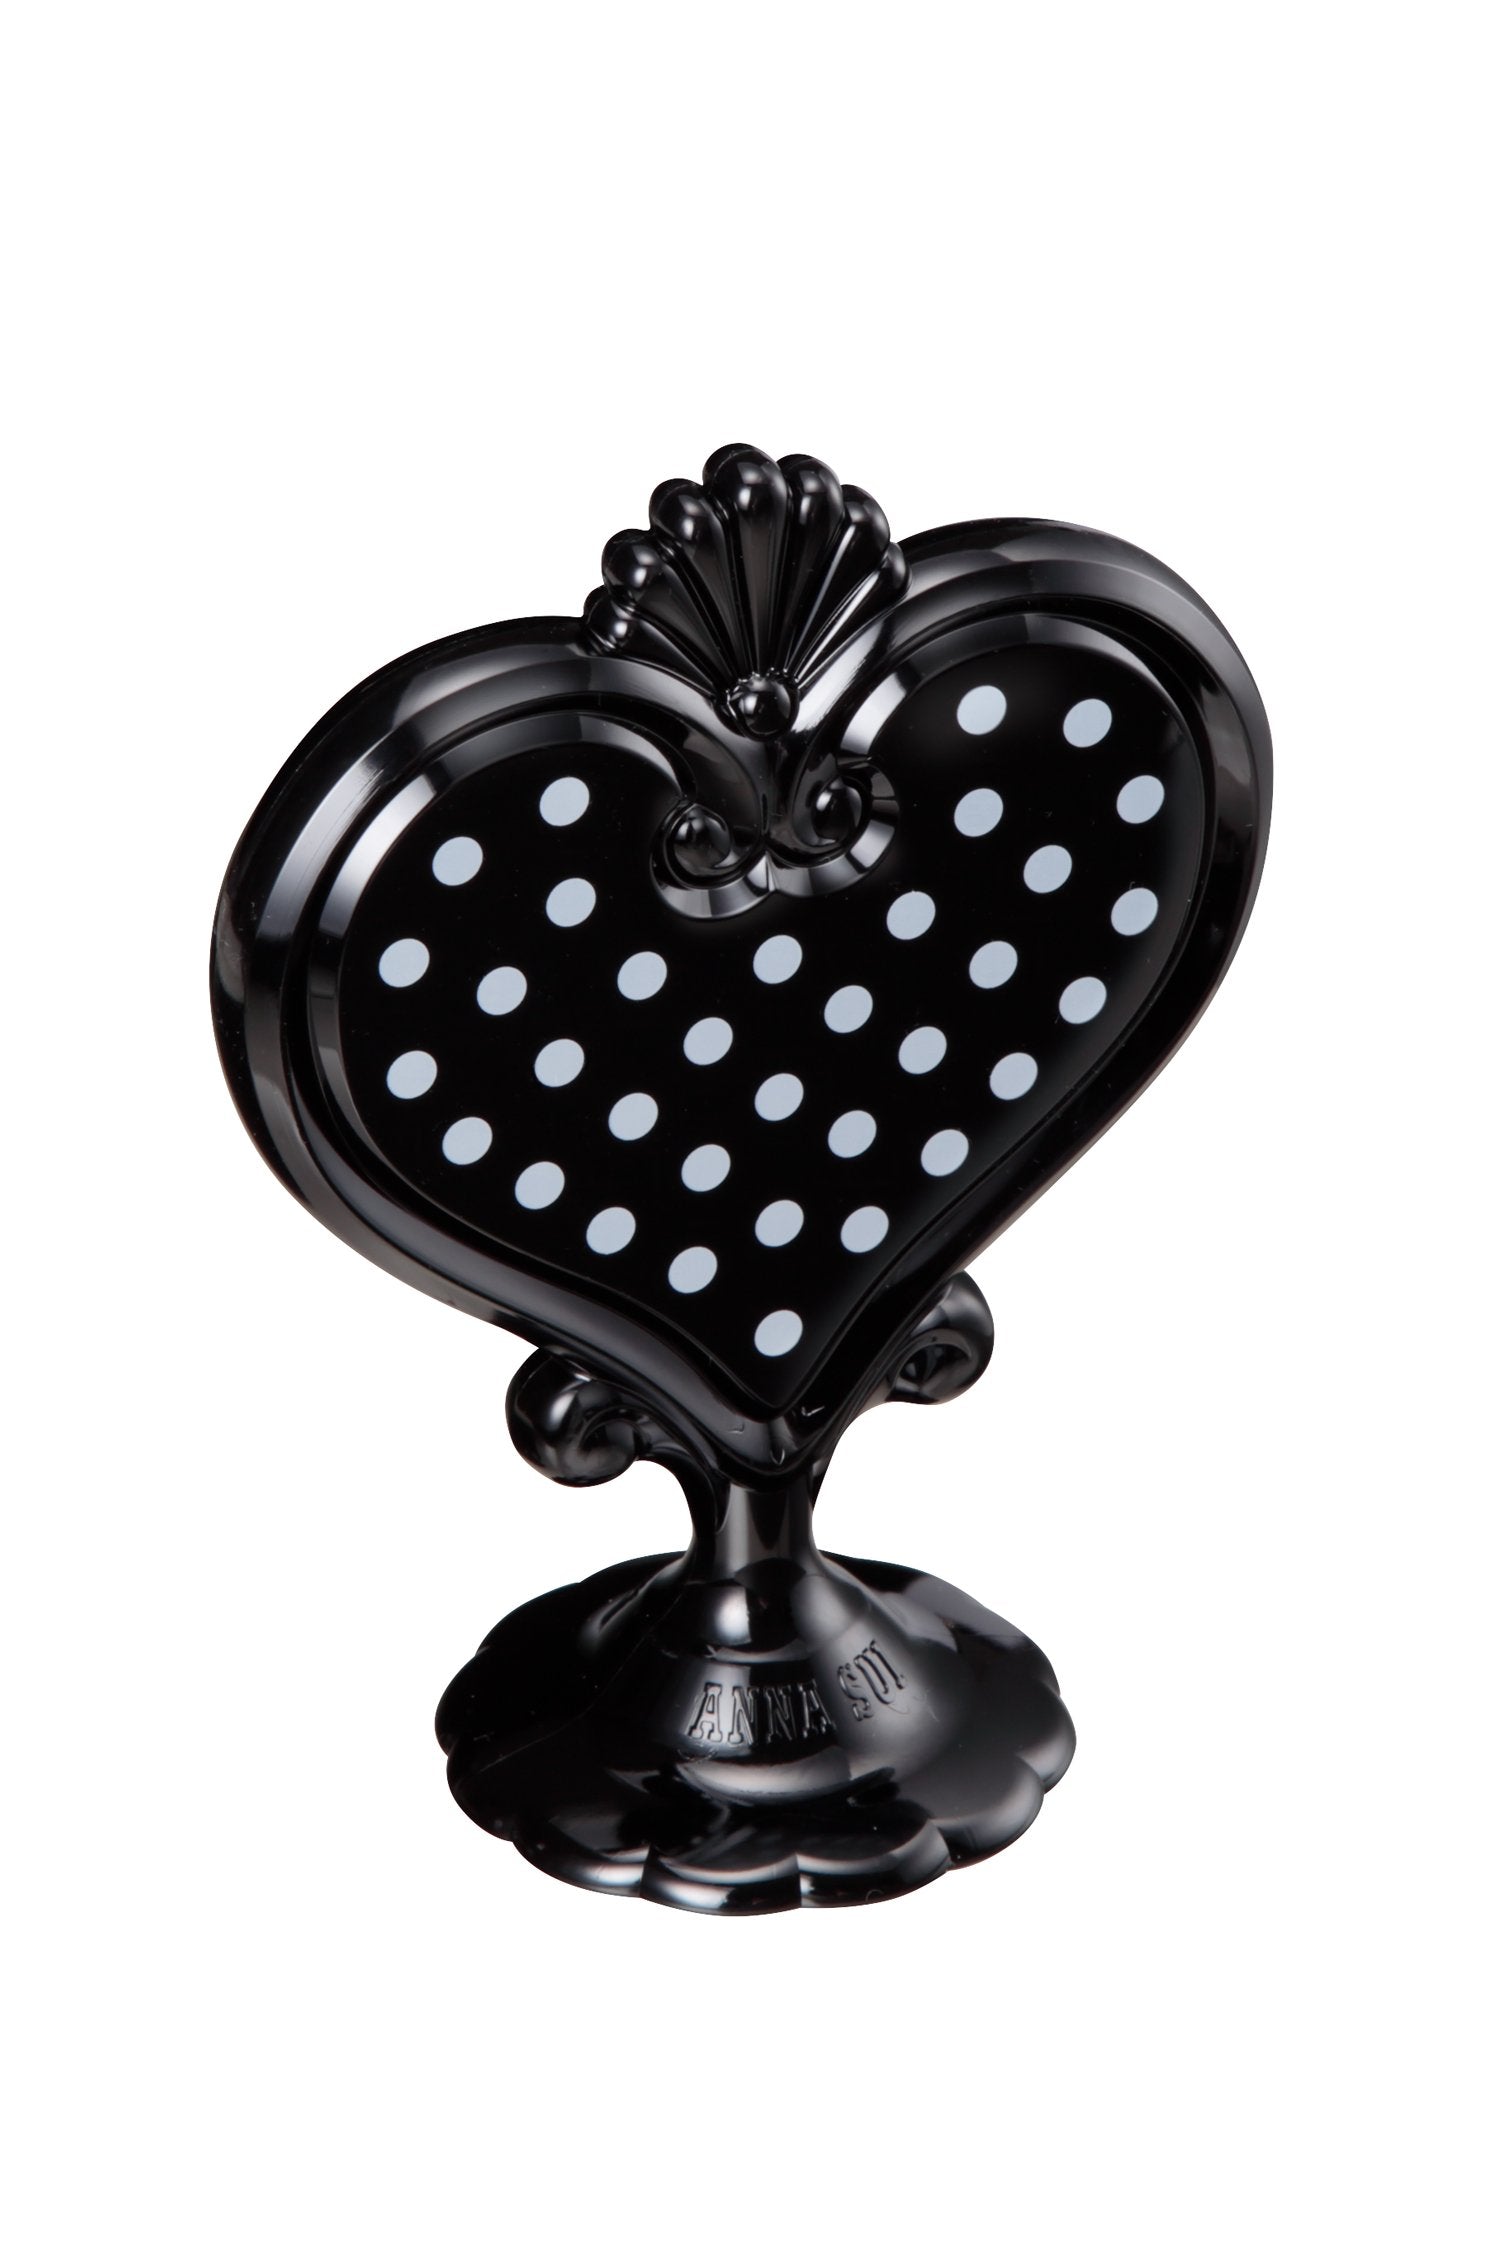  Black Stand Mirror in a heart-shaped with white dots in it on one side, mirror on the other, on a stand with Anna branding